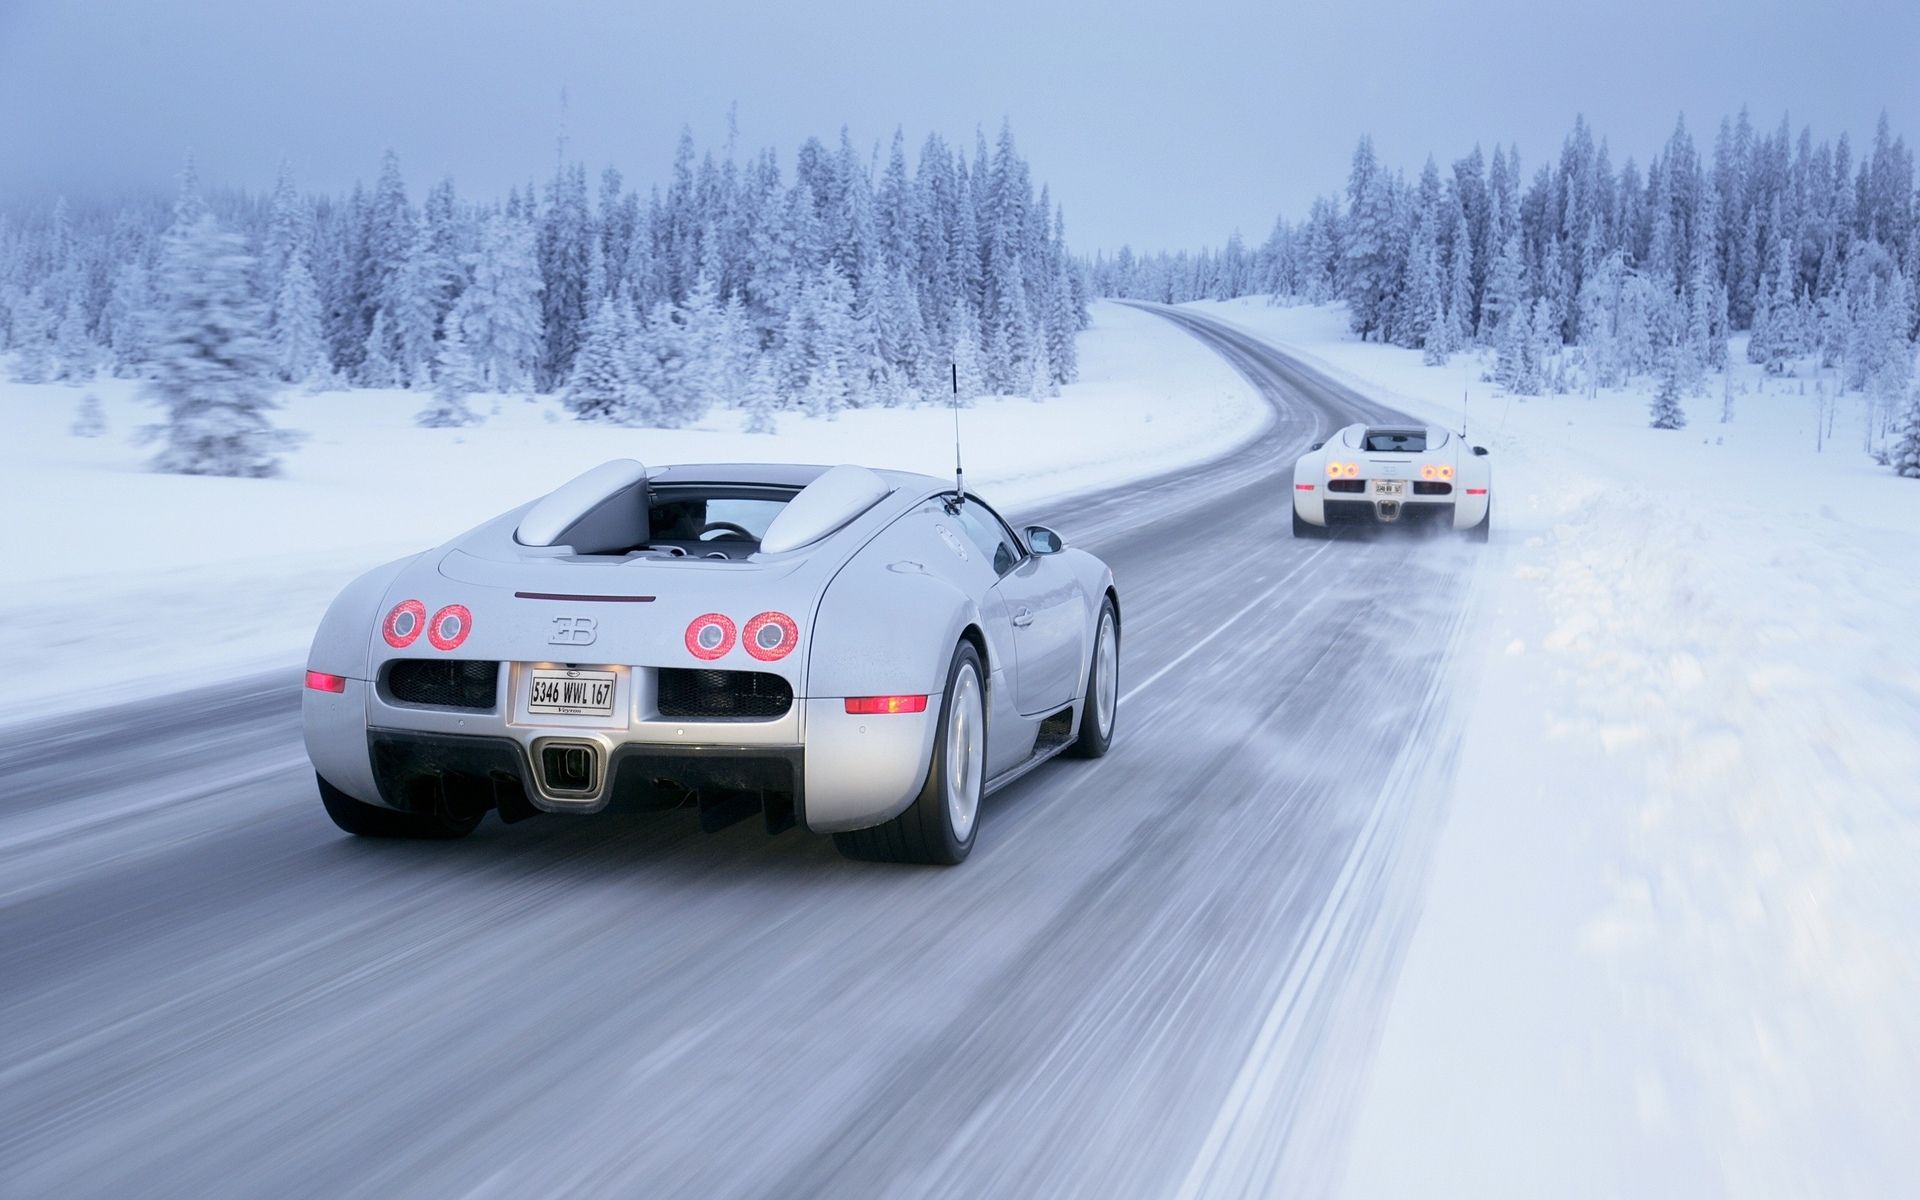 Bugatti Veyron vehicles cars exotic supercar landscapes nature winter snow blizzard trees forests roads track wallpaperx1200